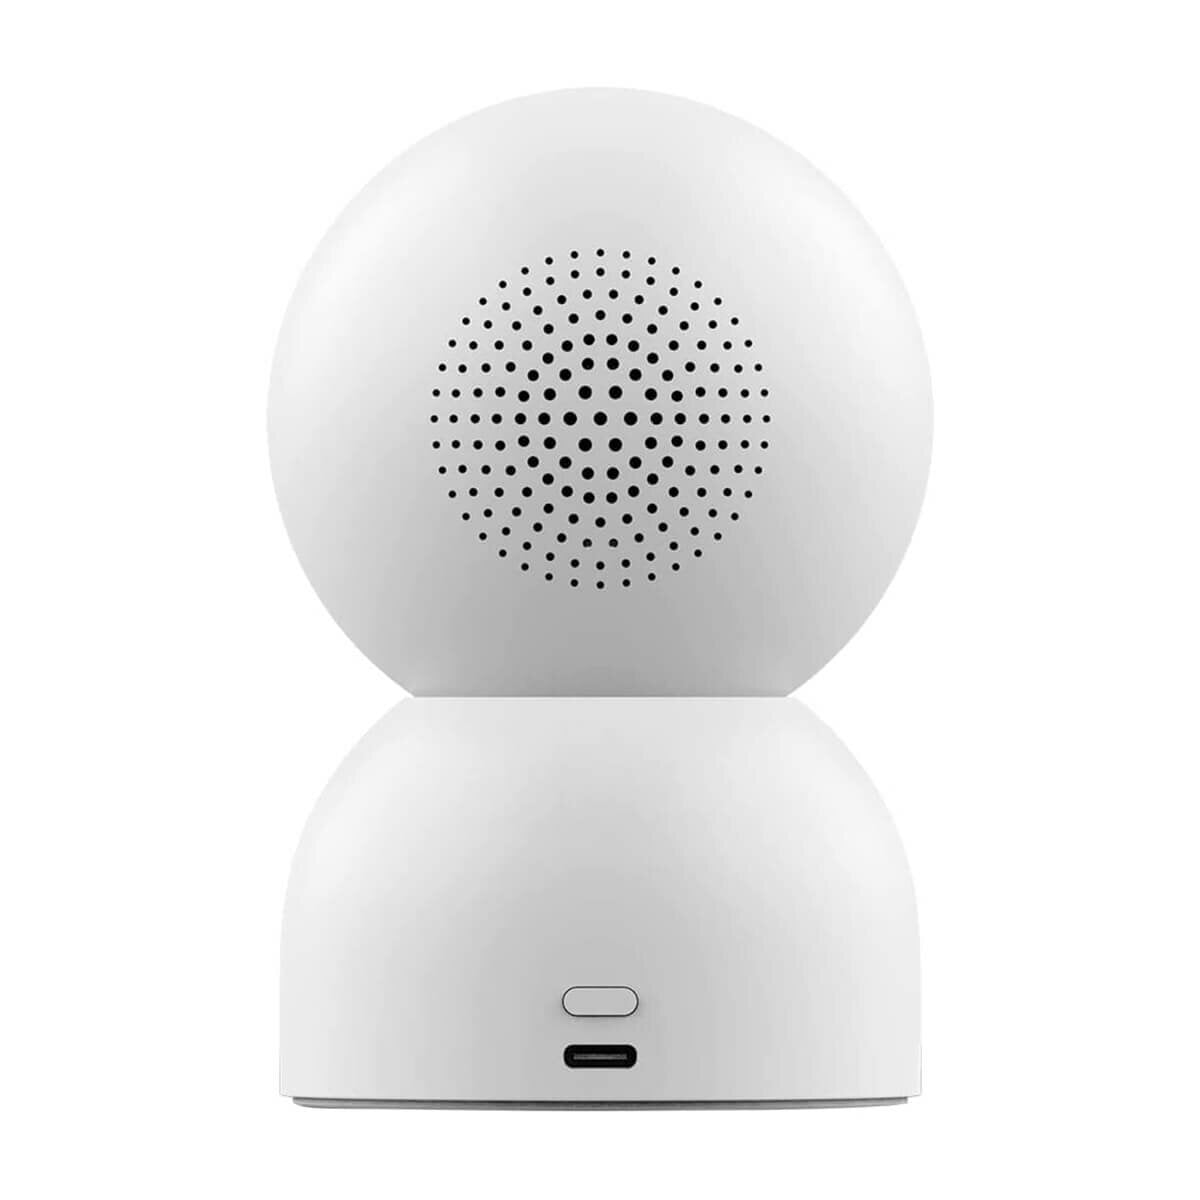 Xiaomi Smart Camera C400


Smart security with
 2.5K clarity

Updated to a 4MP camera with a resolution of 2560x1440

Combined with the 6P lens, the camera effectively reduces light refraction.

Night vision with no visible red glow for clearer and safer